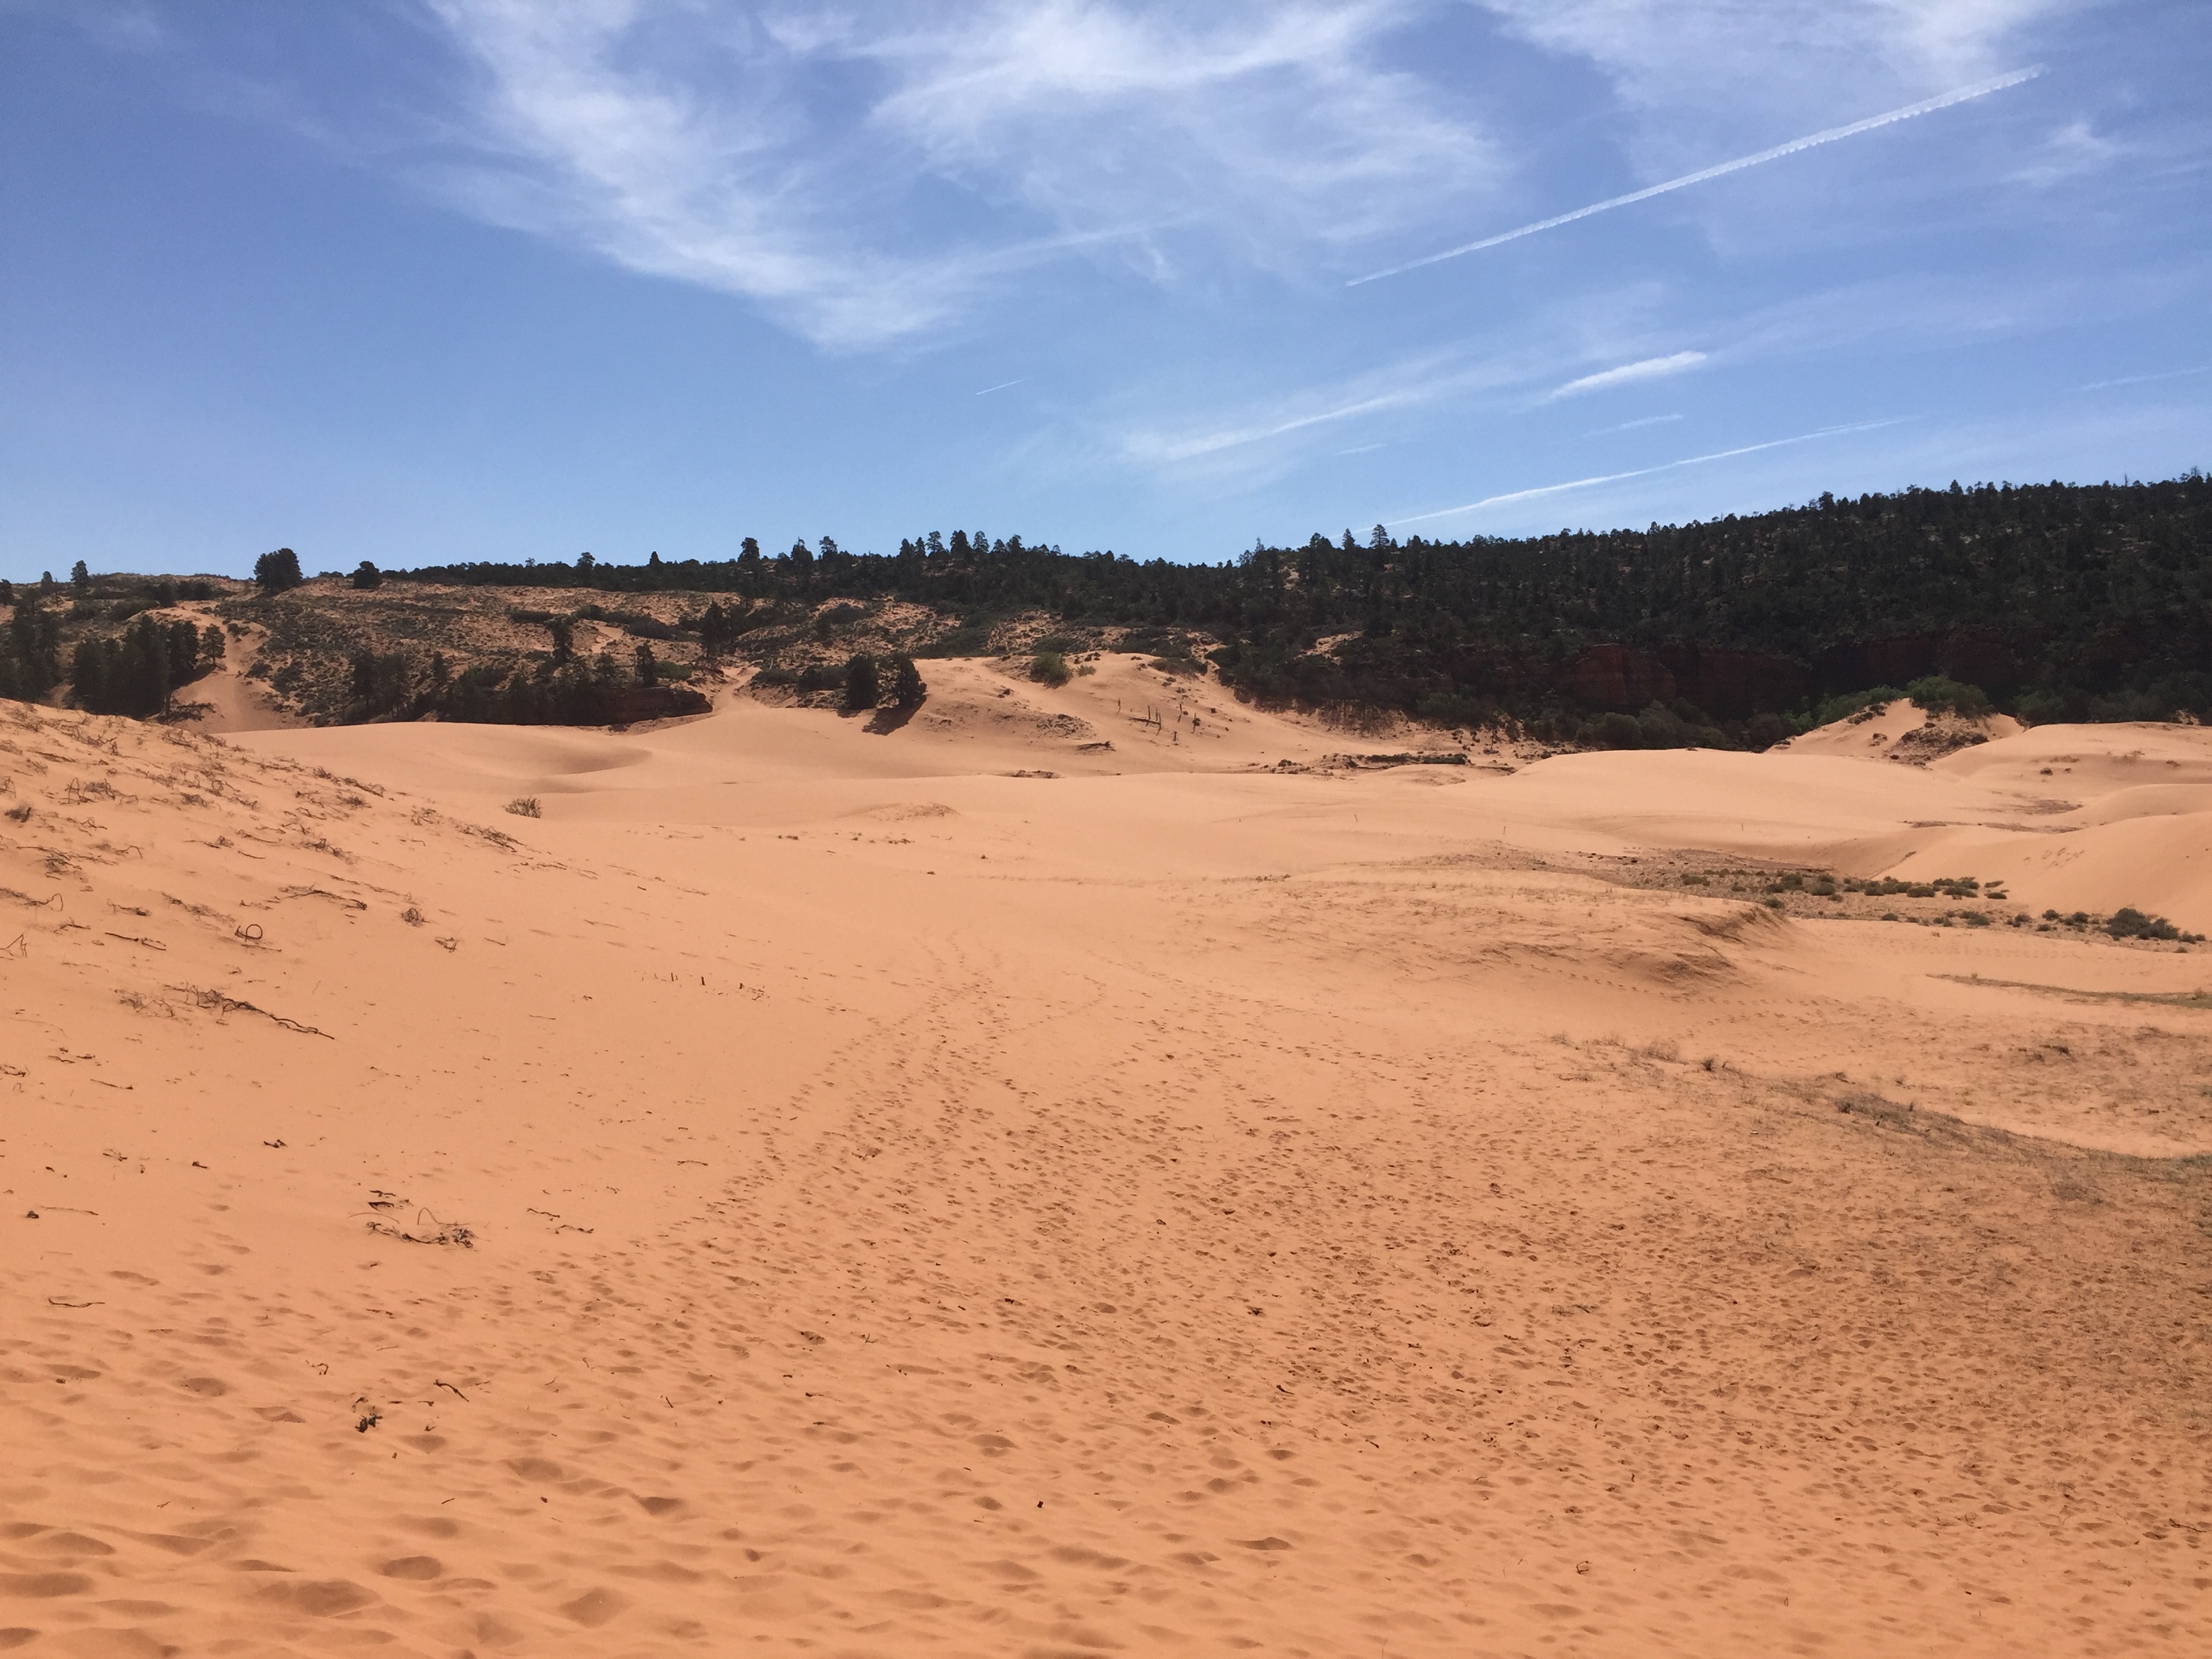 Some sand dunes at the Coral Pink Sand Dunes State Park